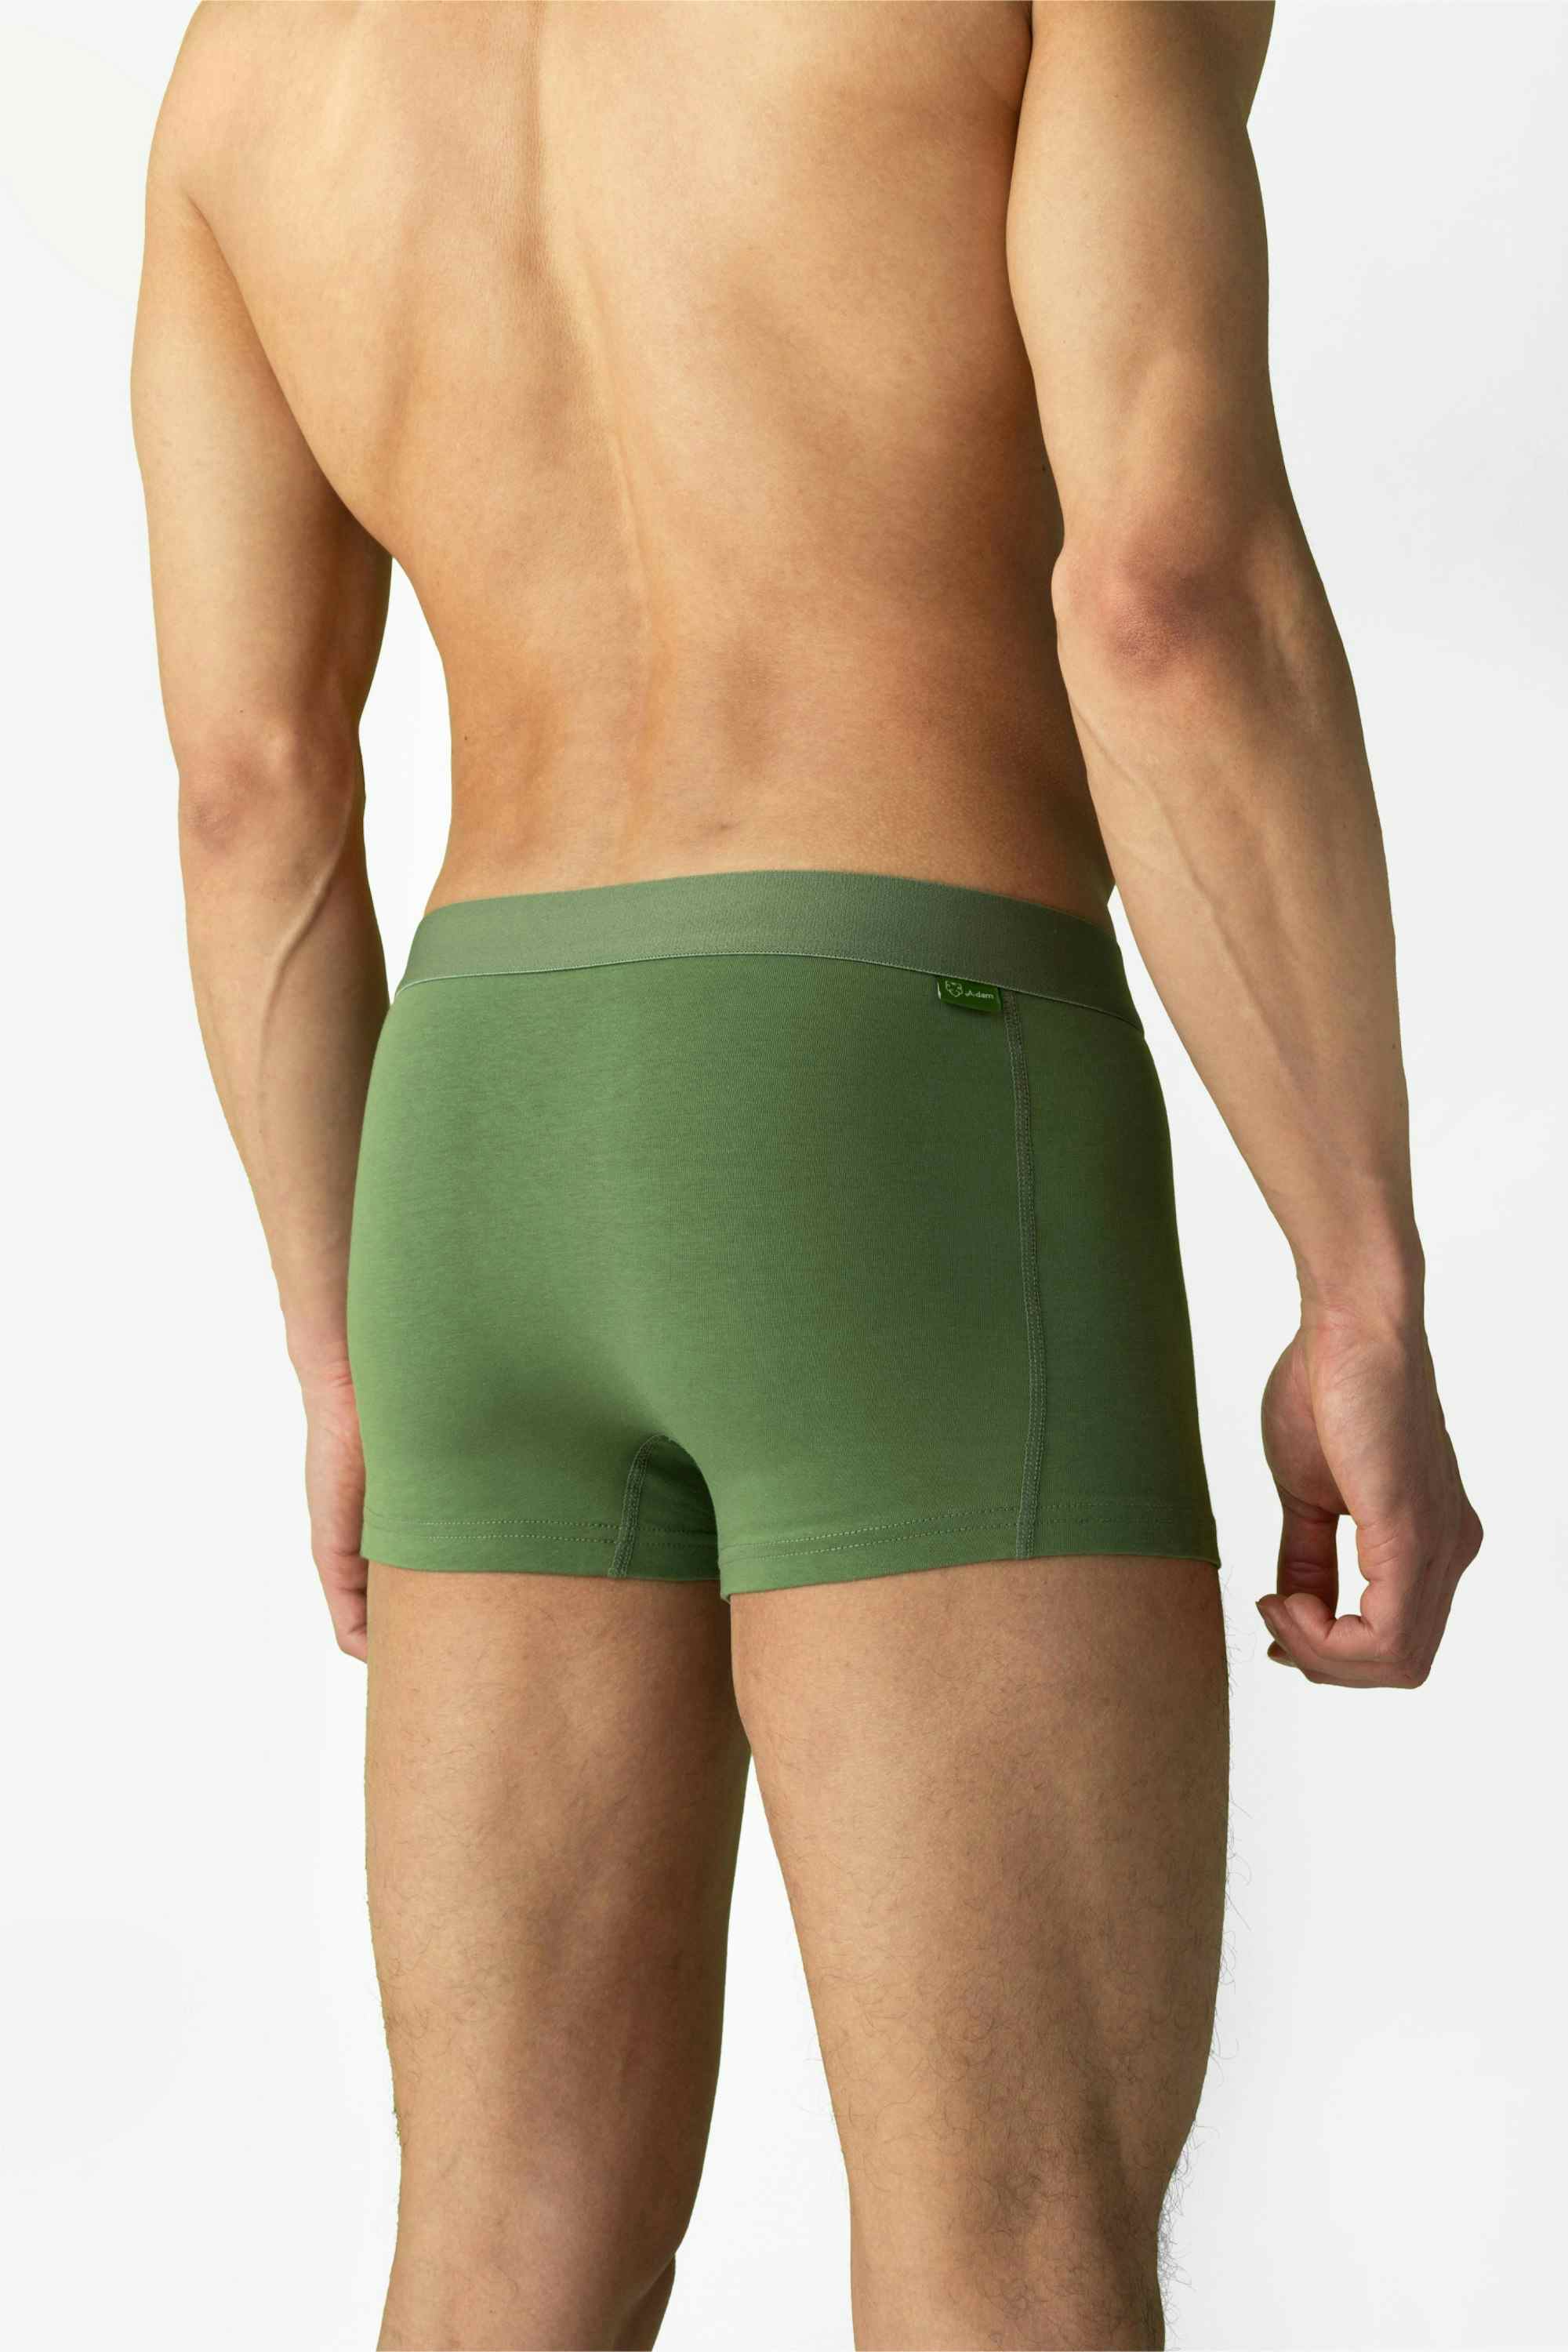 Solid Green Trunks